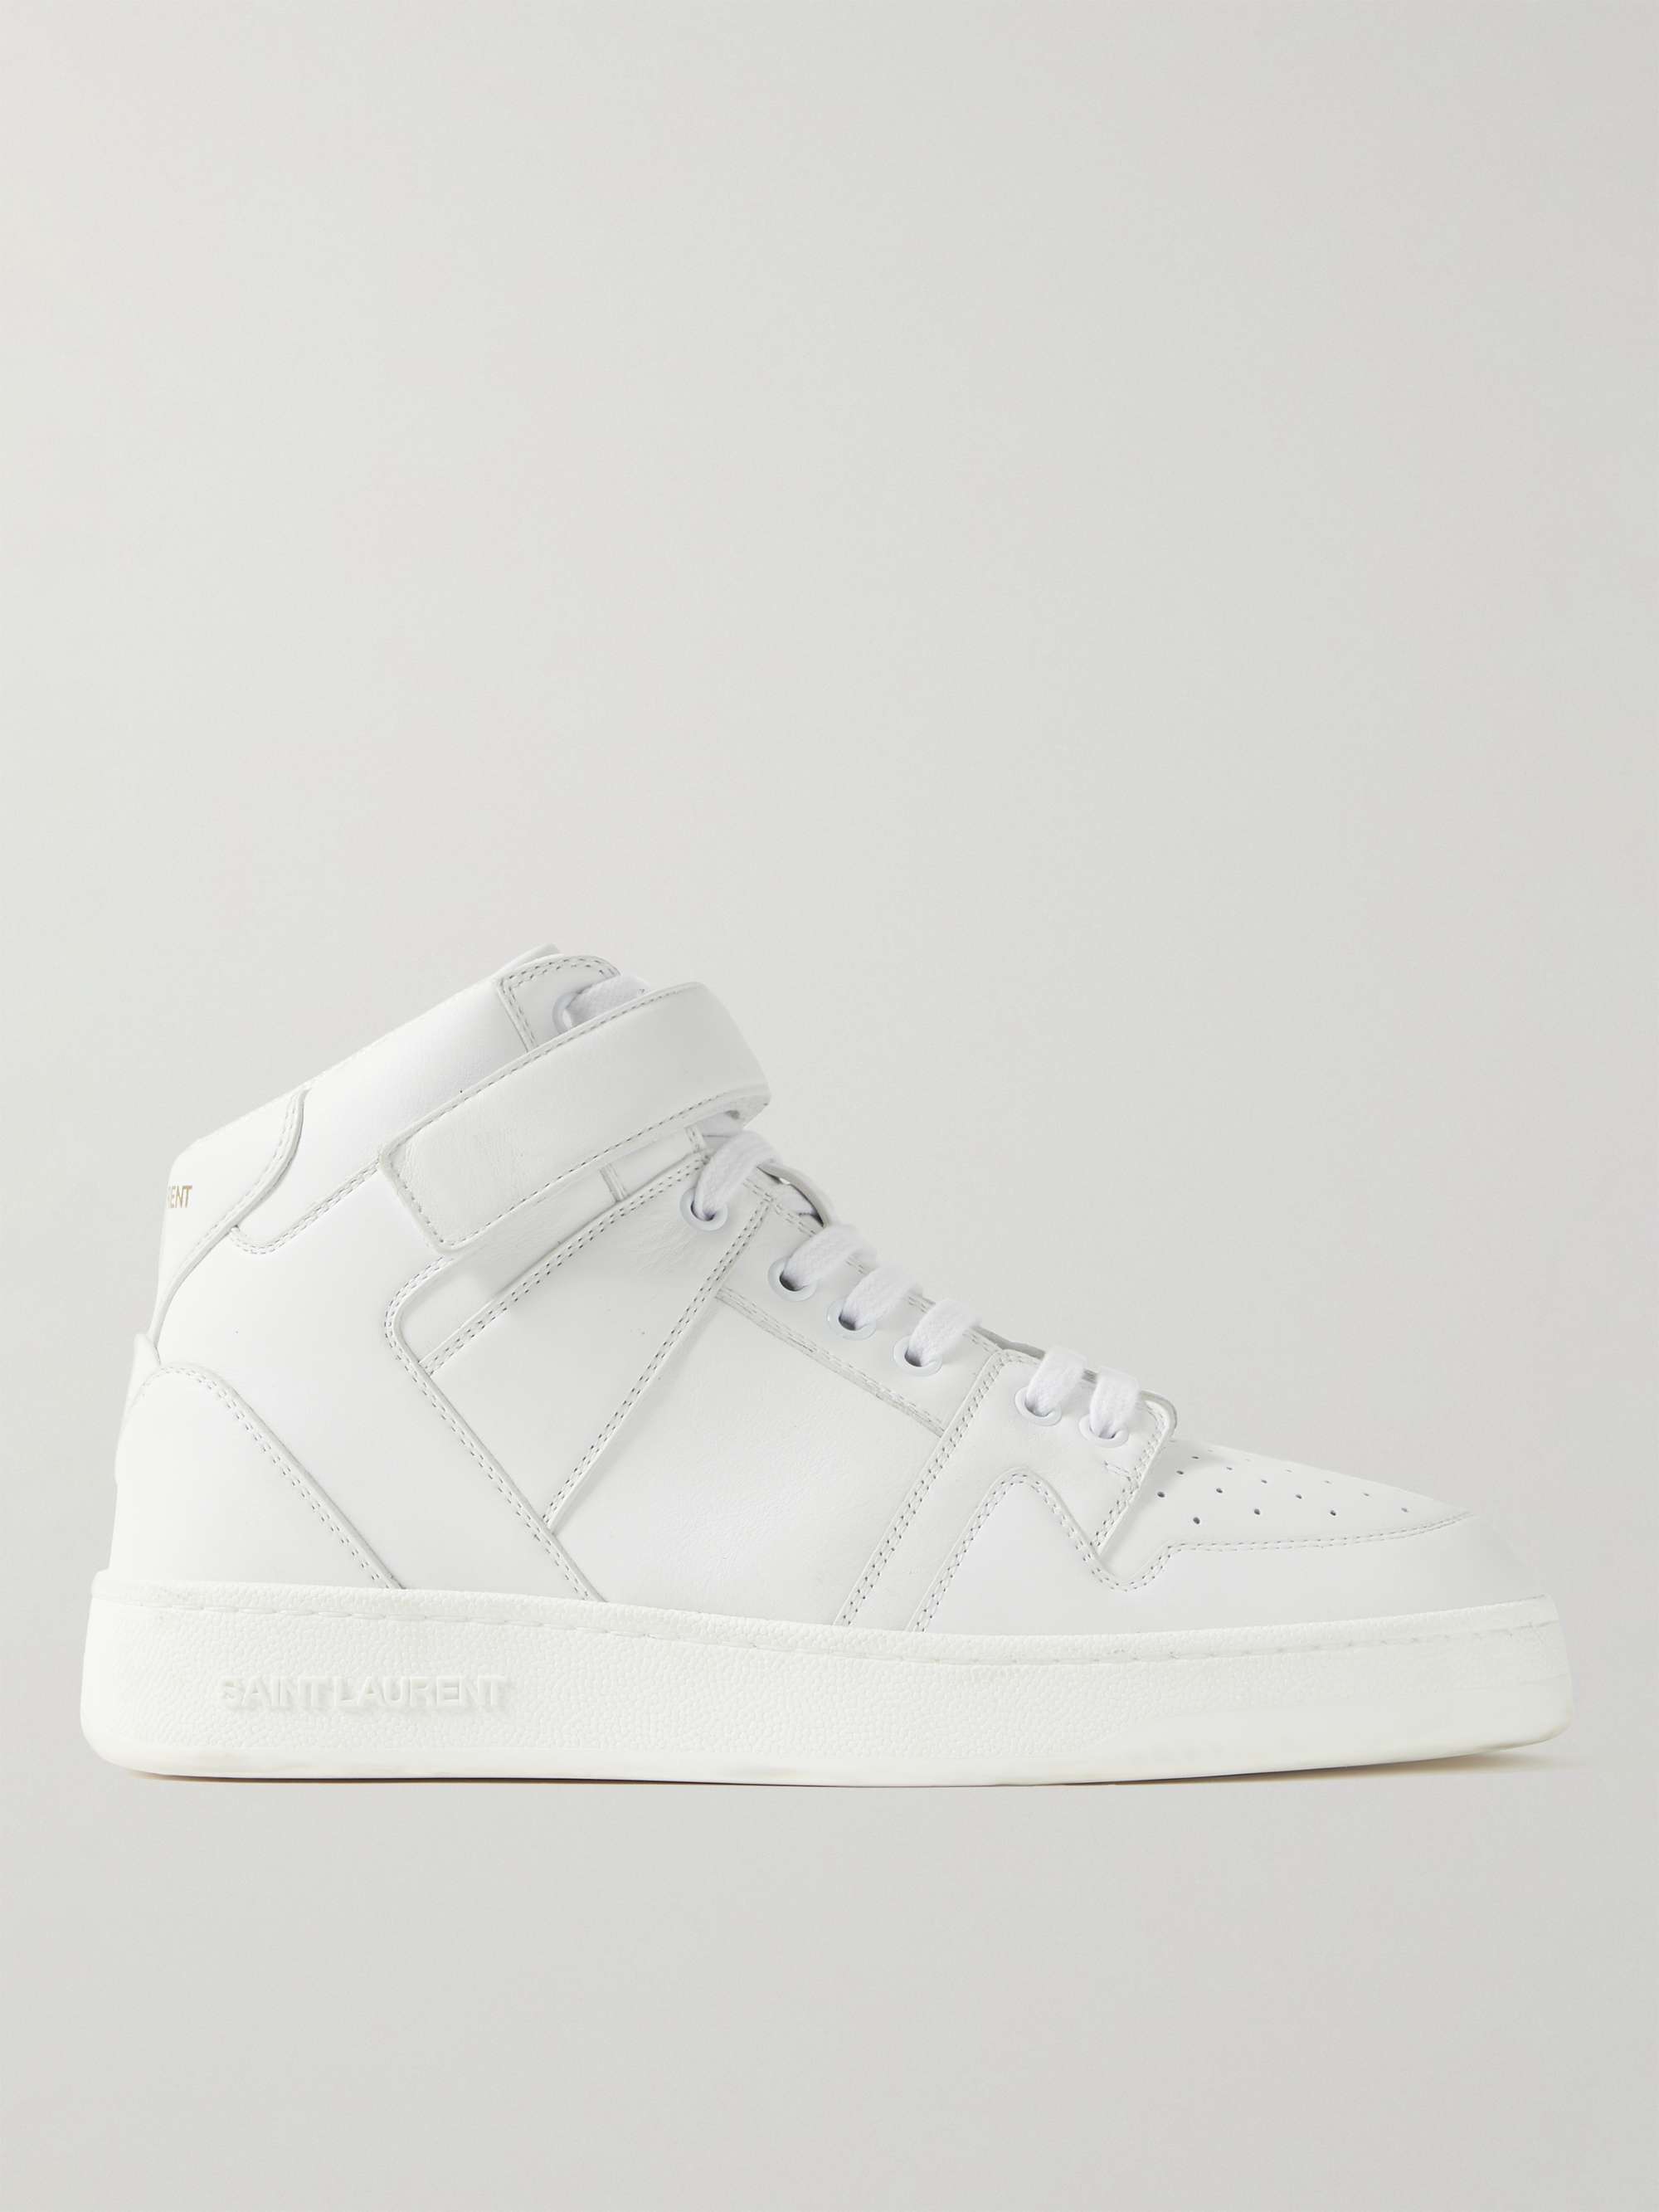 SAINT LAURENT Greenwich Leather High-Top Sneakers for Men | MR PORTER